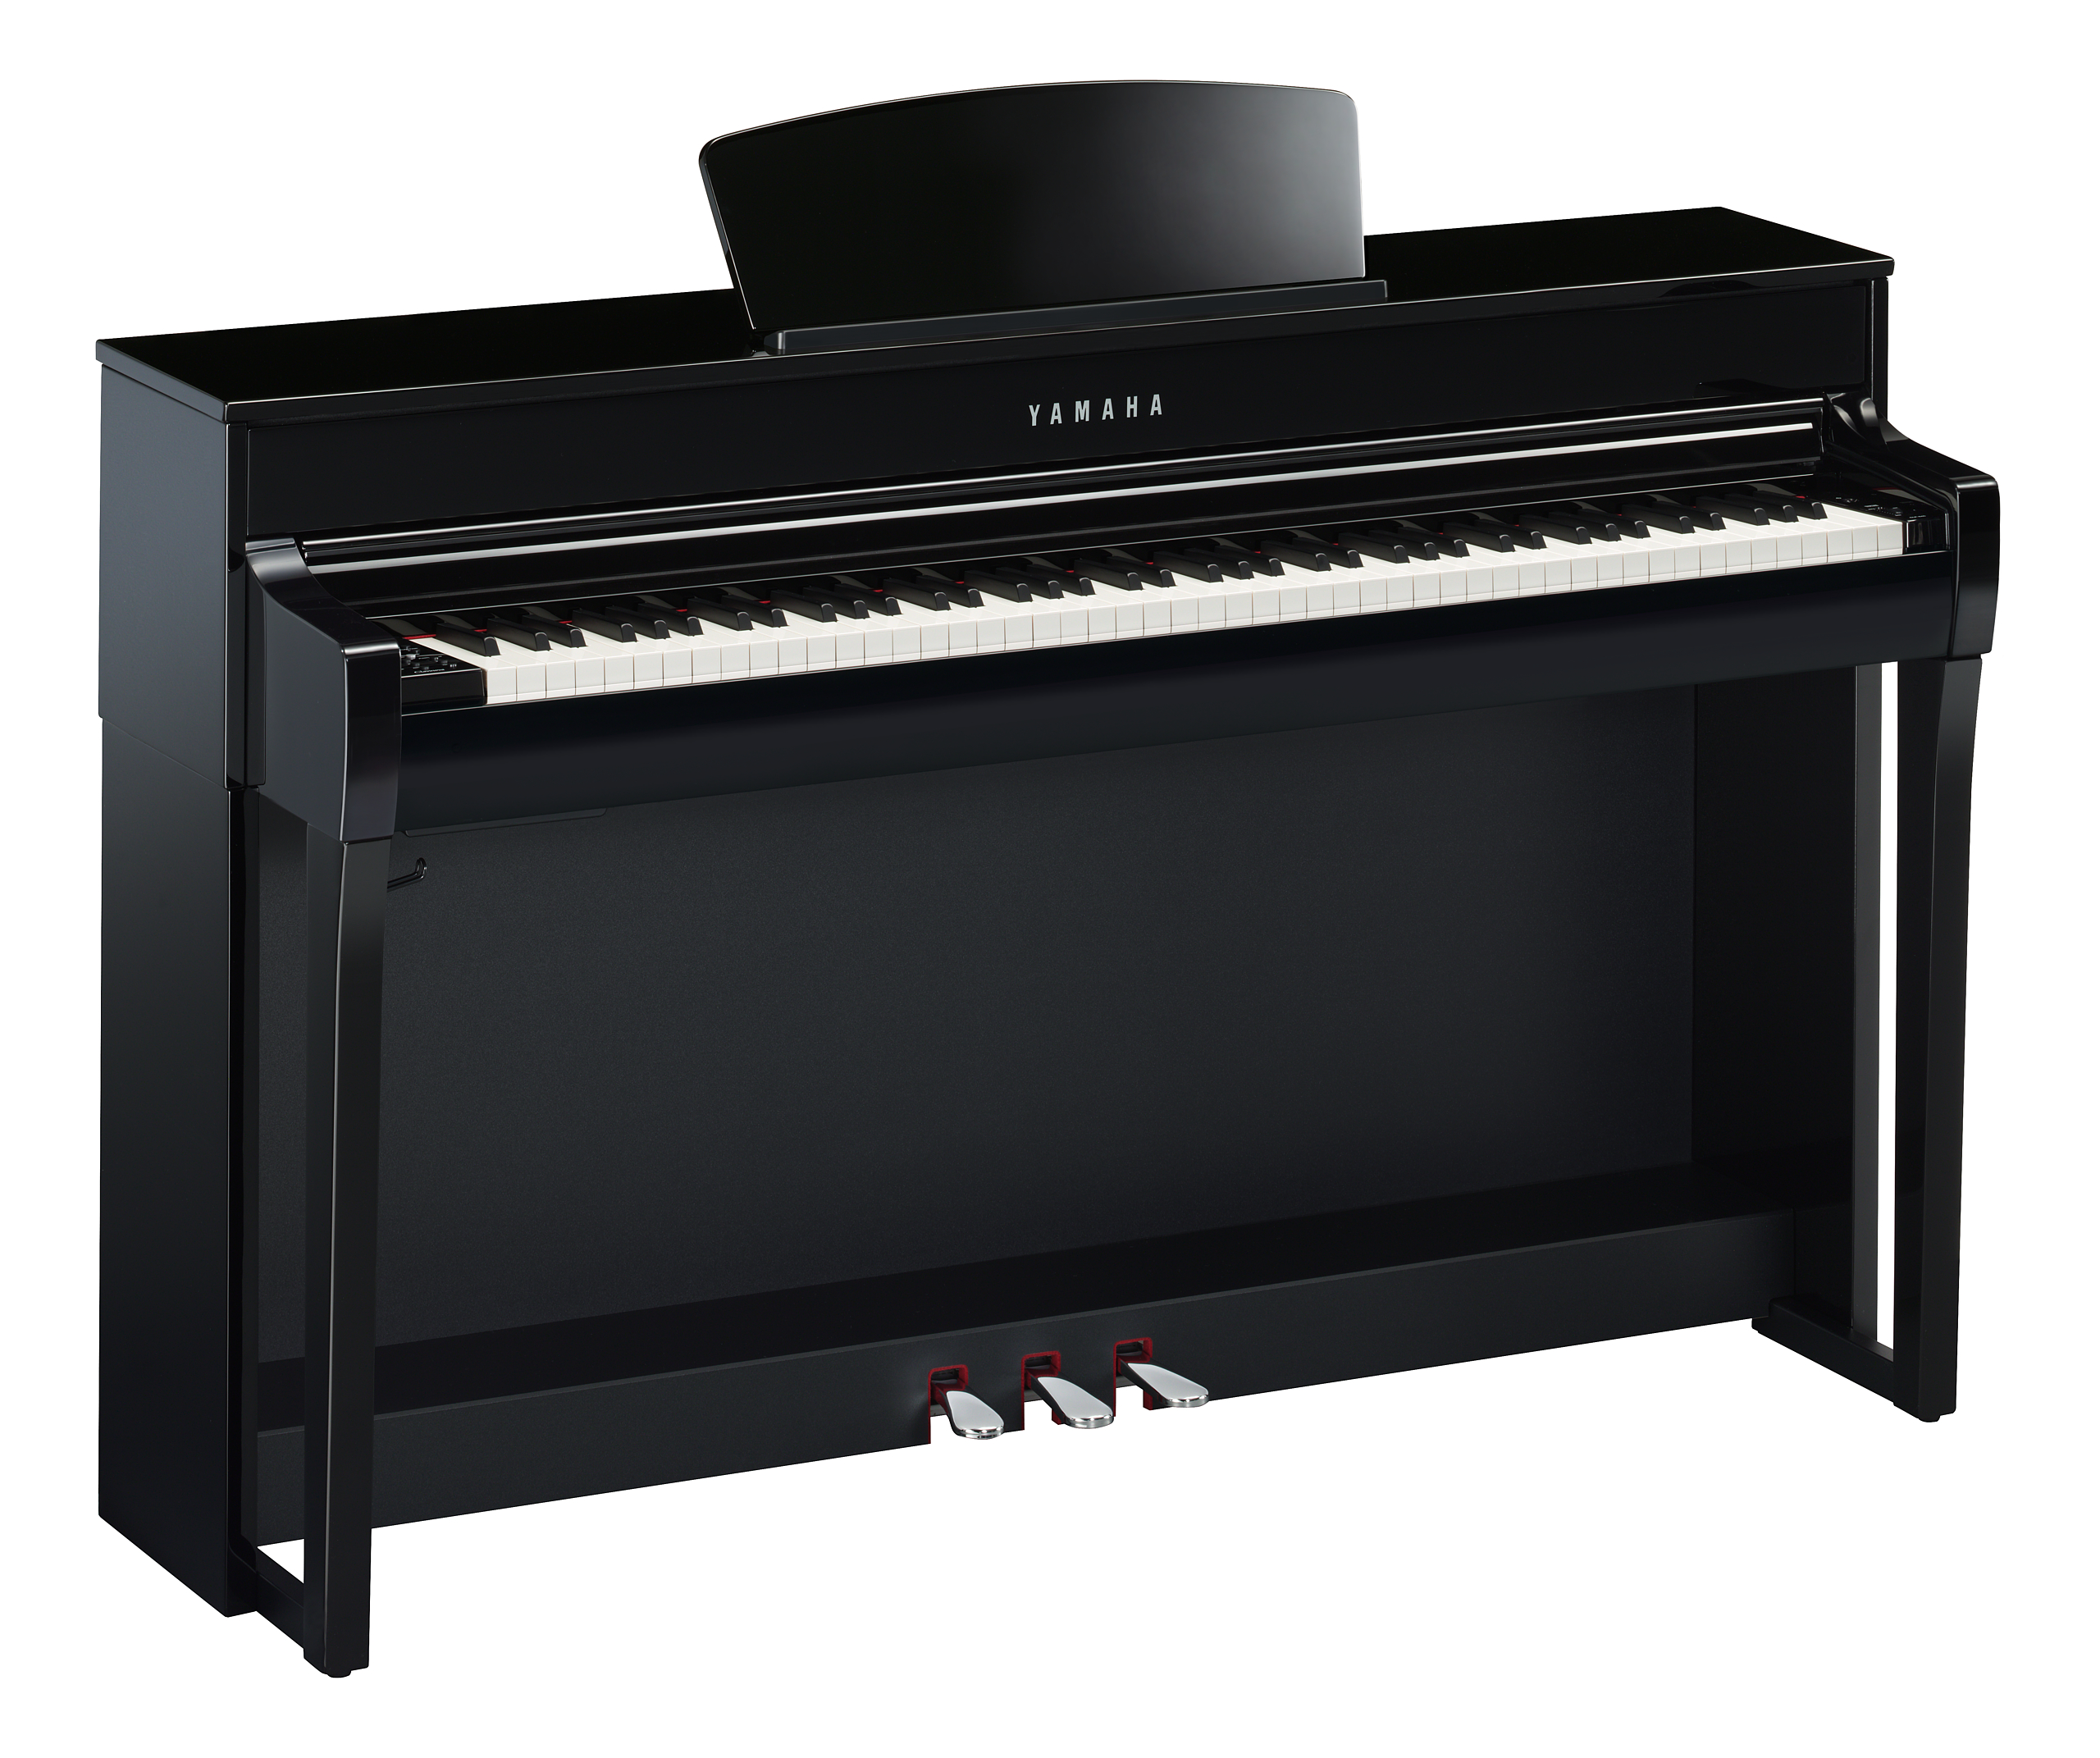 Yamaha Clp735pe - Digital piano with stand - Variation 1